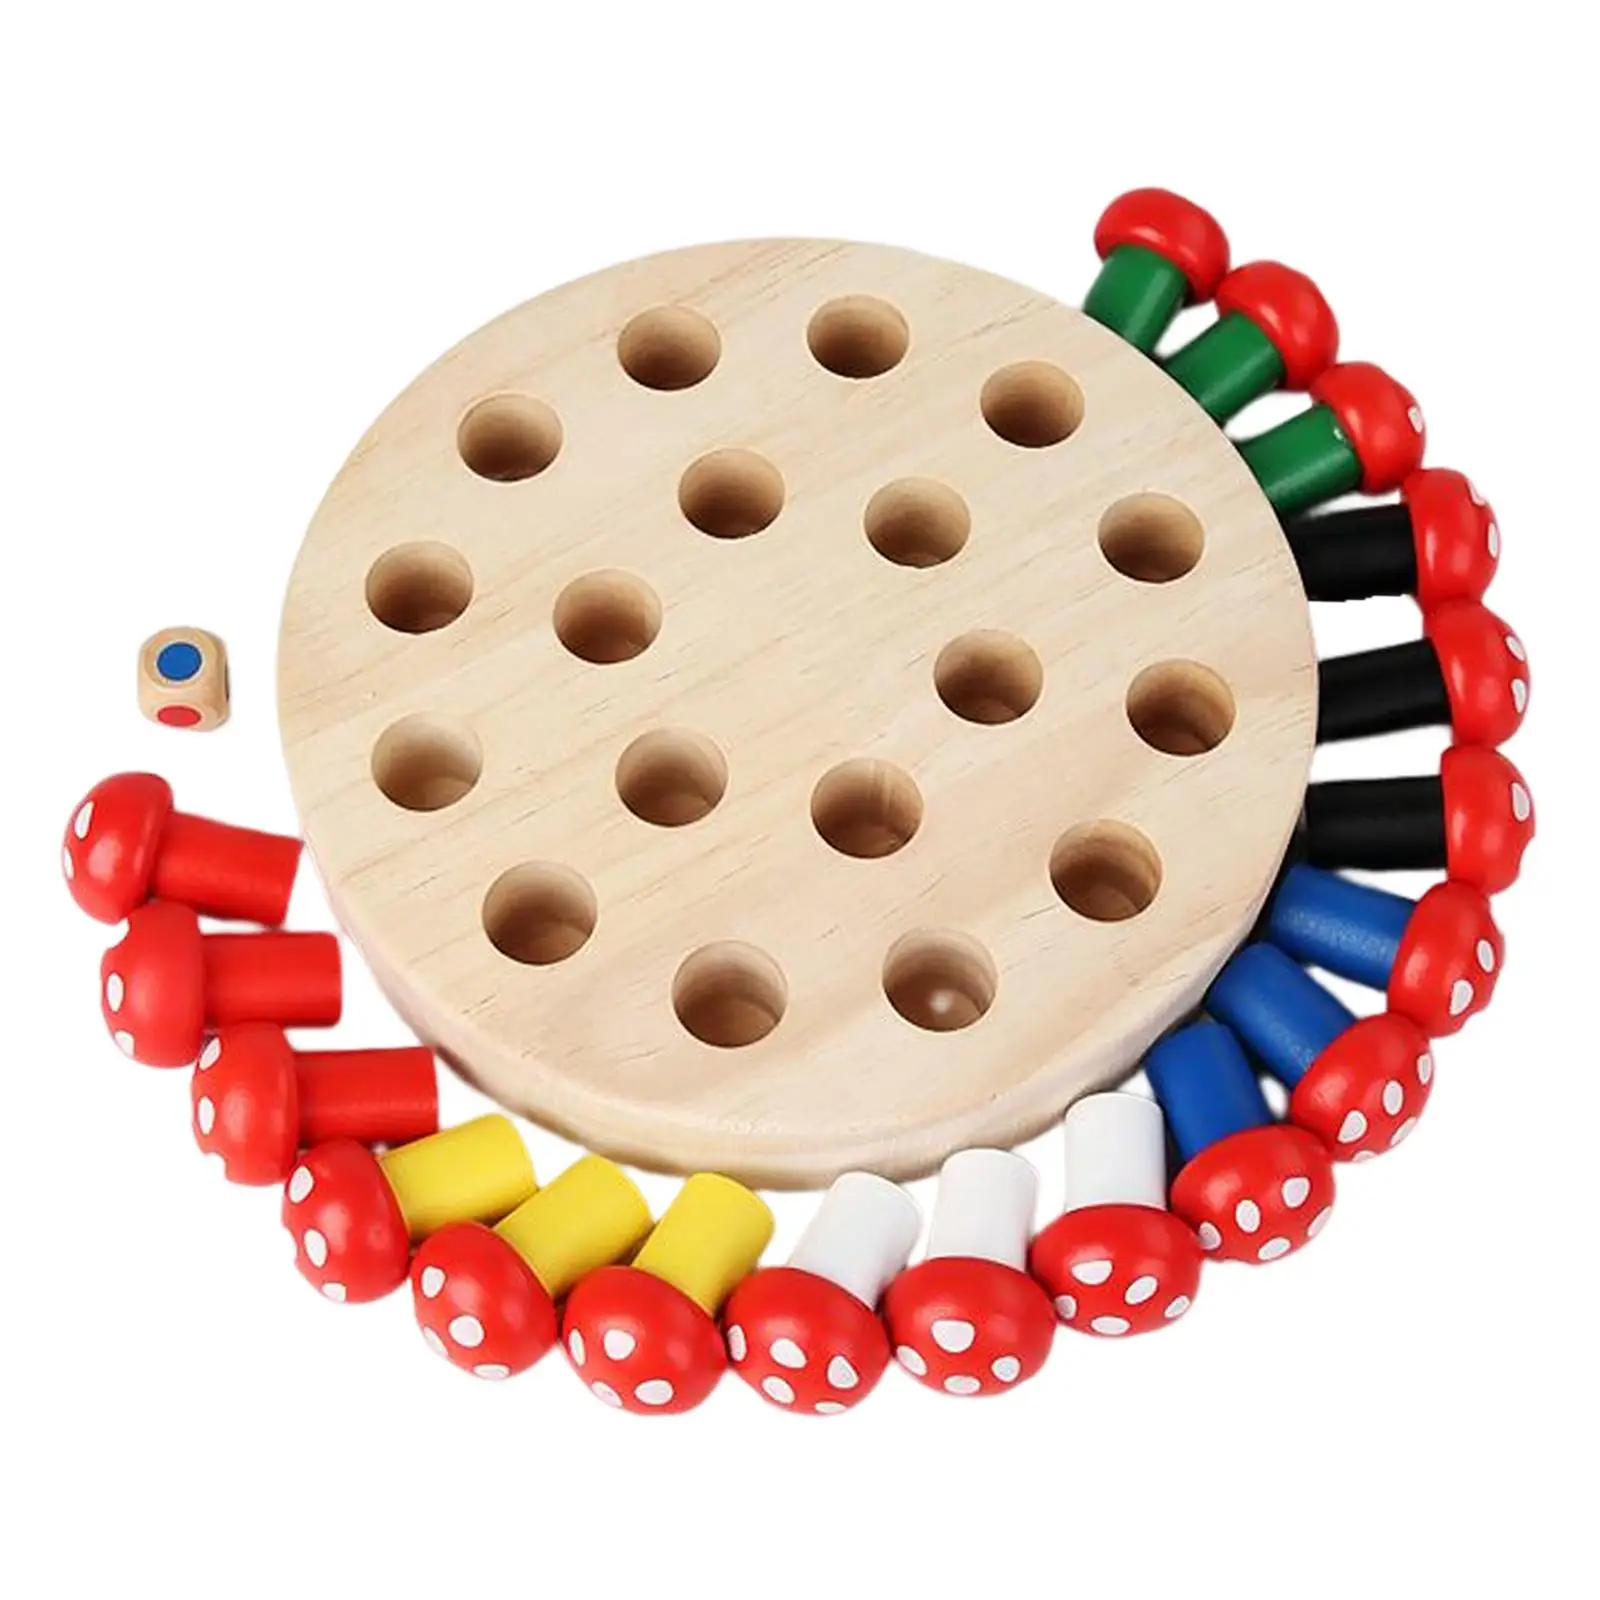 24 Board Game Color Cognitive Ability Toy Educational Montessori Color Memory for Interaction Indoor Activity Leisure Party